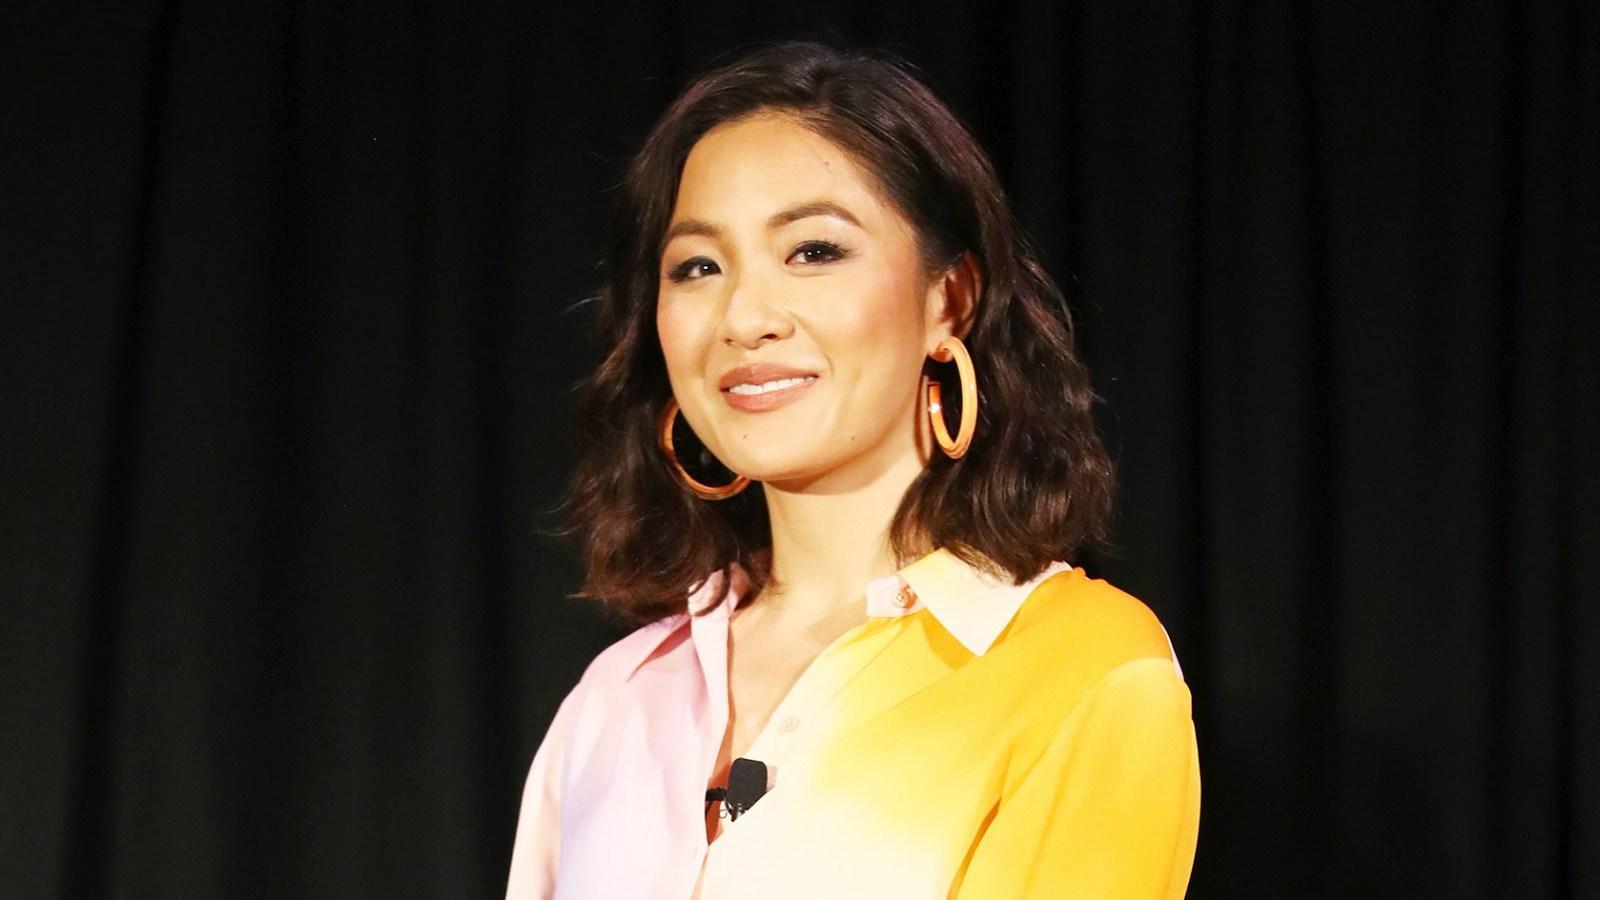 Constance Wu Says She Almost Didn't Take the 'Crazy Rich Asians' Role